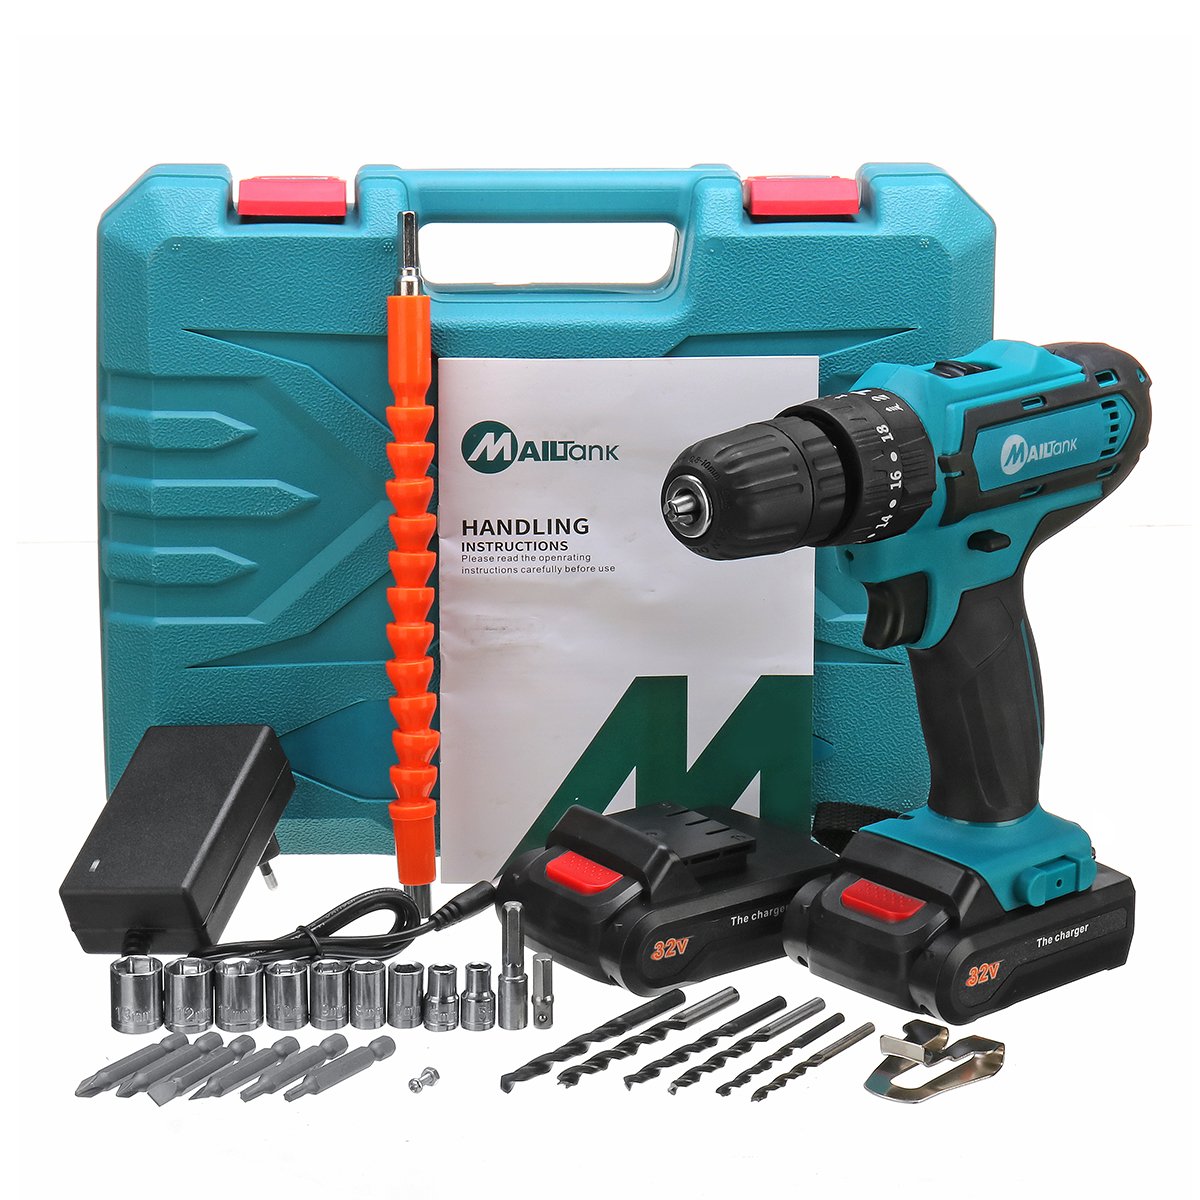 32V 2 Speed Power Drills 6000mah Cordless Drill 3 IN1 Electric Screwdriver Hammer Hand Drill 2 Batteries 2